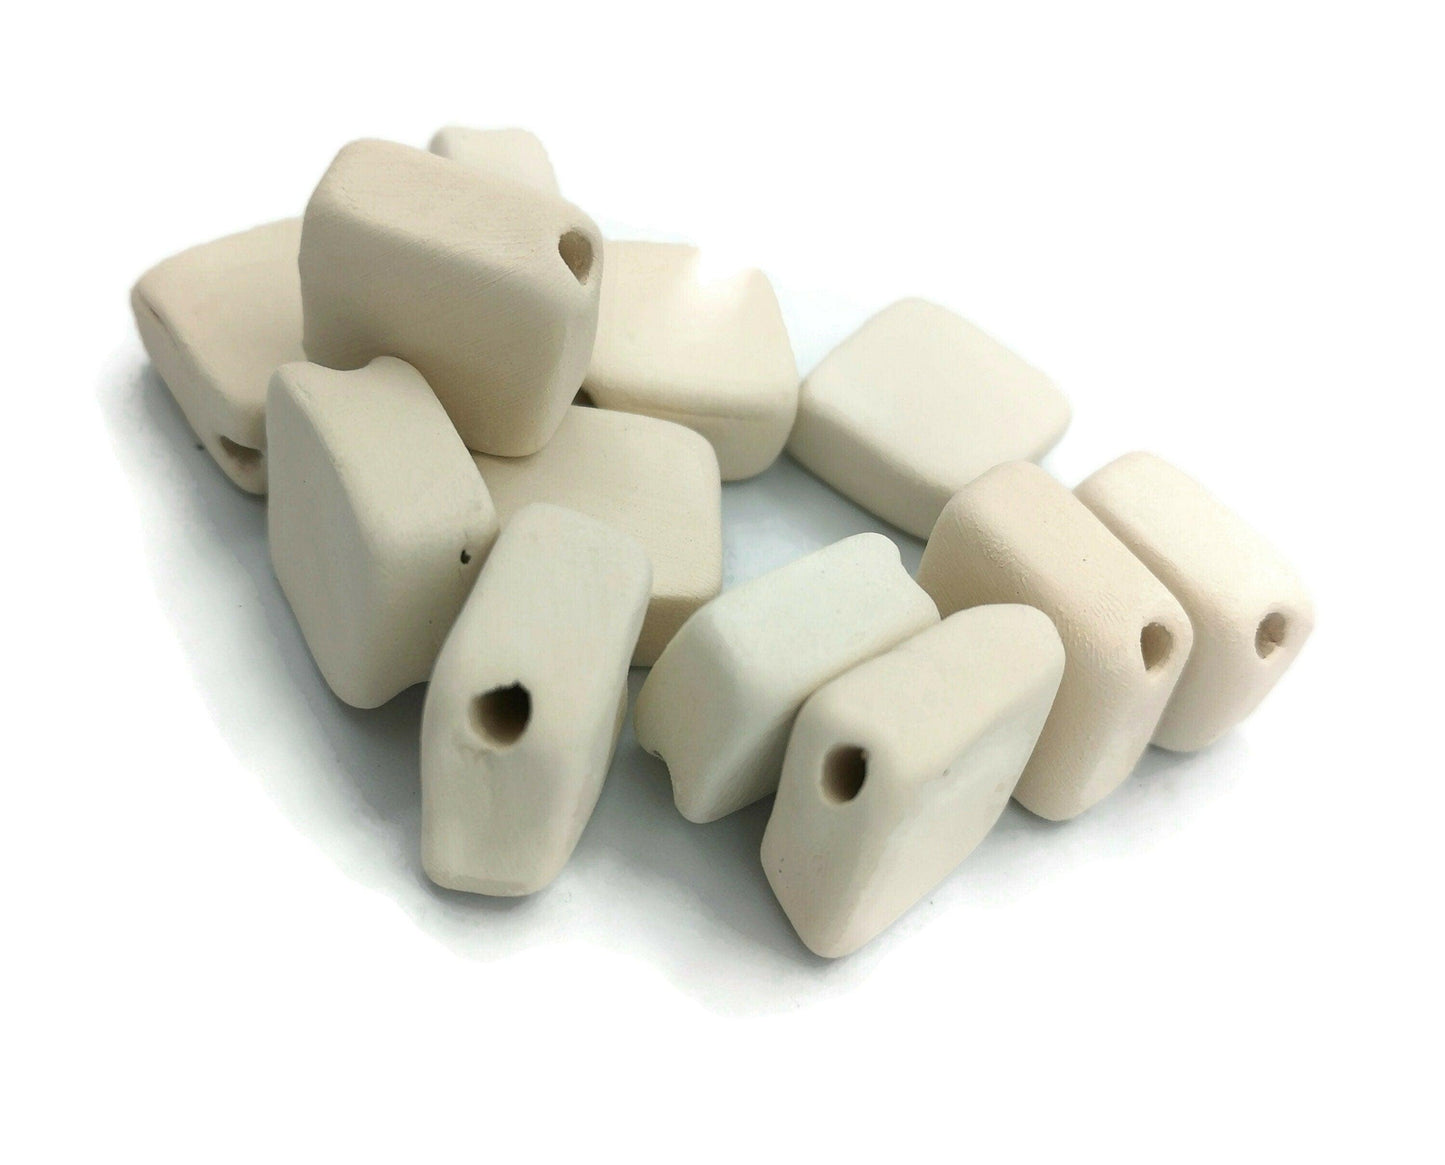 12Pc SquareHandmade Ceramic Bisque Beads For Jewelry Making, Craft Kits For Adults, Unpainted Macrame Beads Ready To Paint - Ceramica Ana Rafael